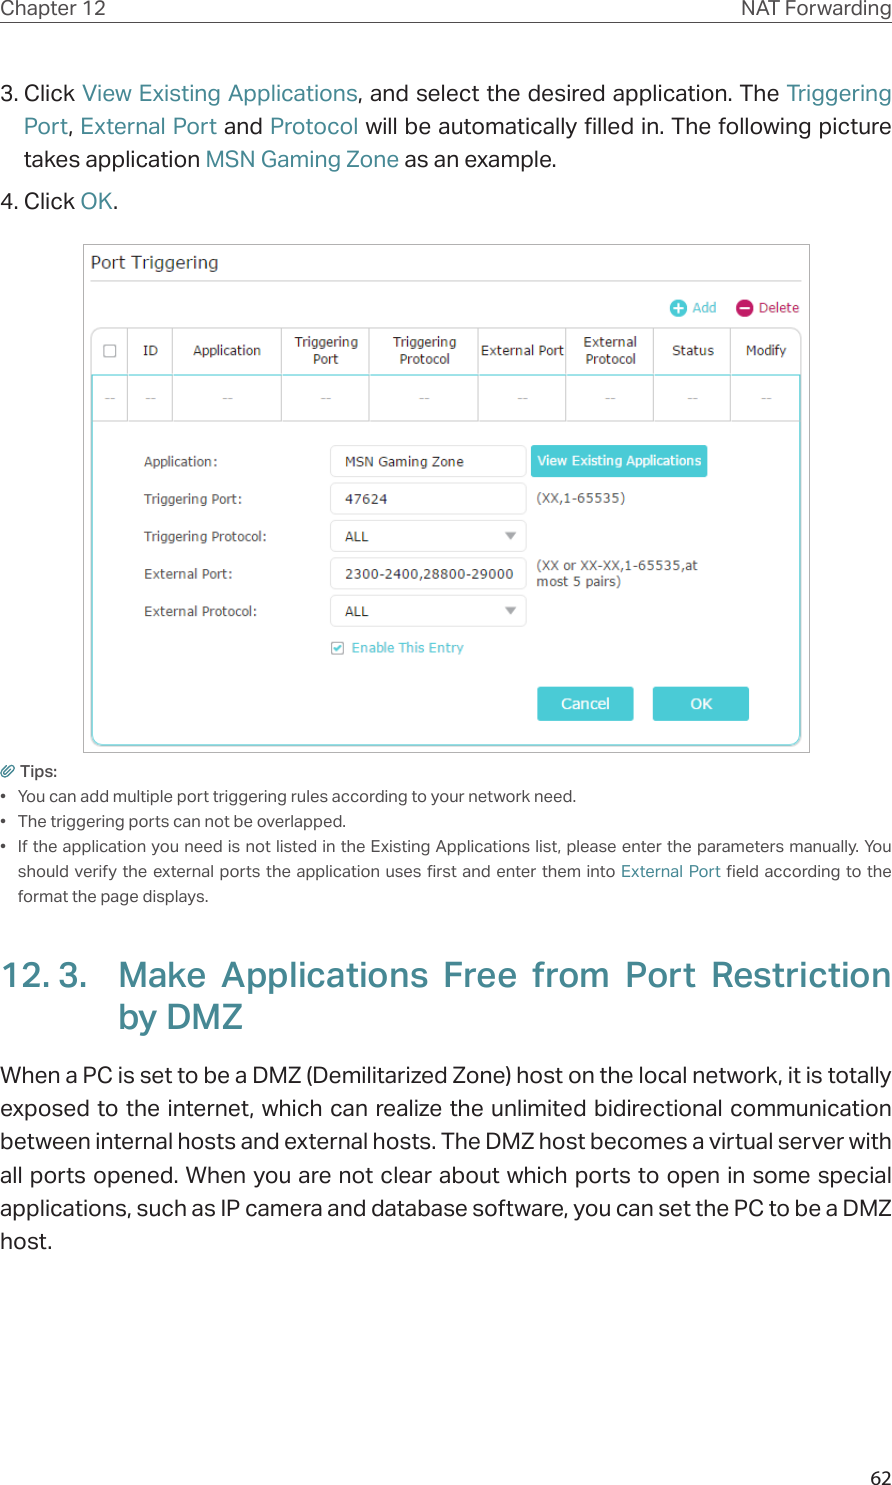 62Chapter 12 NAT Forwarding3. Click View Existing Applications, and select the desired application. The Triggering Port, External Port and Protocol will be automatically filled in. The following picture takes application MSN Gaming Zone as an example.4. Click OK.Tips:•  You can add multiple port triggering rules according to your network need.•  The triggering ports can not be overlapped.•  If the application you need is not listed in the Existing Applications list, please enter the parameters manually. You should verify the external ports the application uses first and enter them into External Port field according to the format the page displays.12. 3.  Make Applications Free from Port Restriction by DMZWhen a PC is set to be a DMZ (Demilitarized Zone) host on the local network, it is totally exposed to the internet, which can realize the unlimited bidirectional communication between internal hosts and external hosts. The DMZ host becomes a virtual server with all ports opened. When you are not clear about which ports to open in some special applications, such as IP camera and database software, you can set the PC to be a DMZ host.